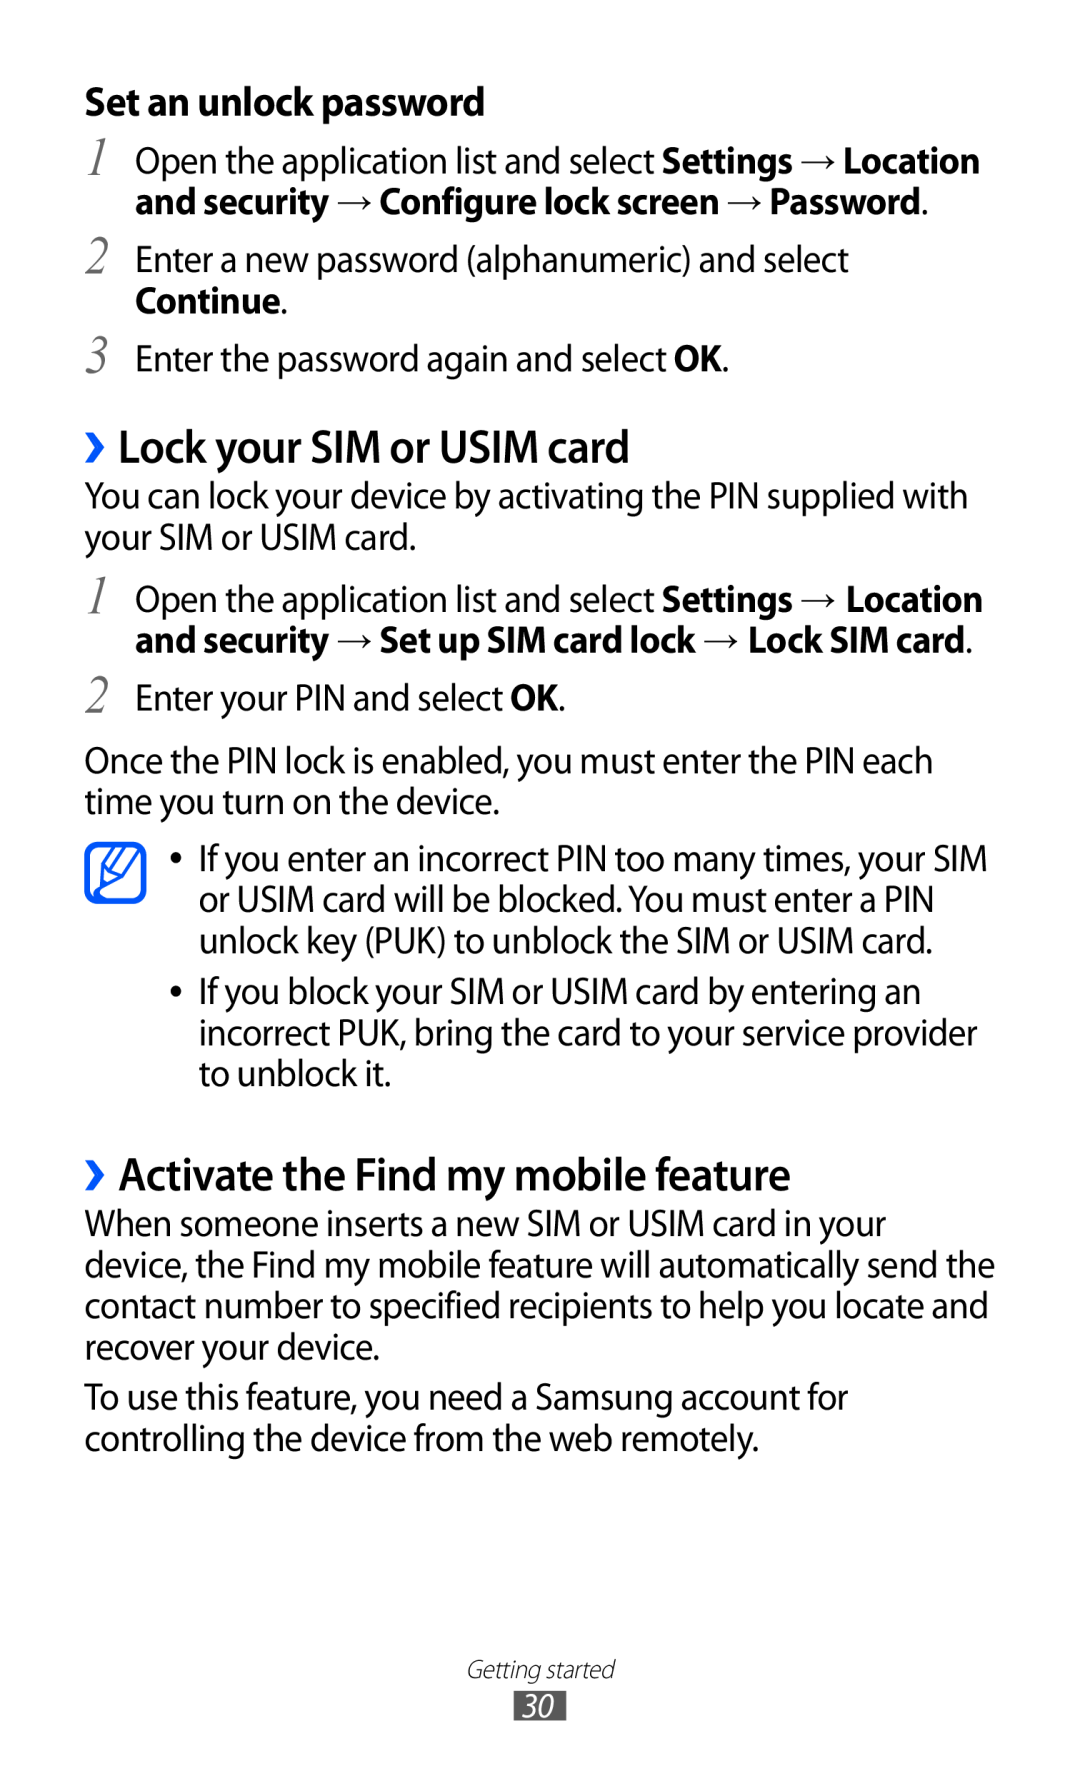 Samsung GT-P7320FKAFTM manual ››Lock your SIM or USIM card, ››Activate the Find my mobile feature, Set an unlock password 